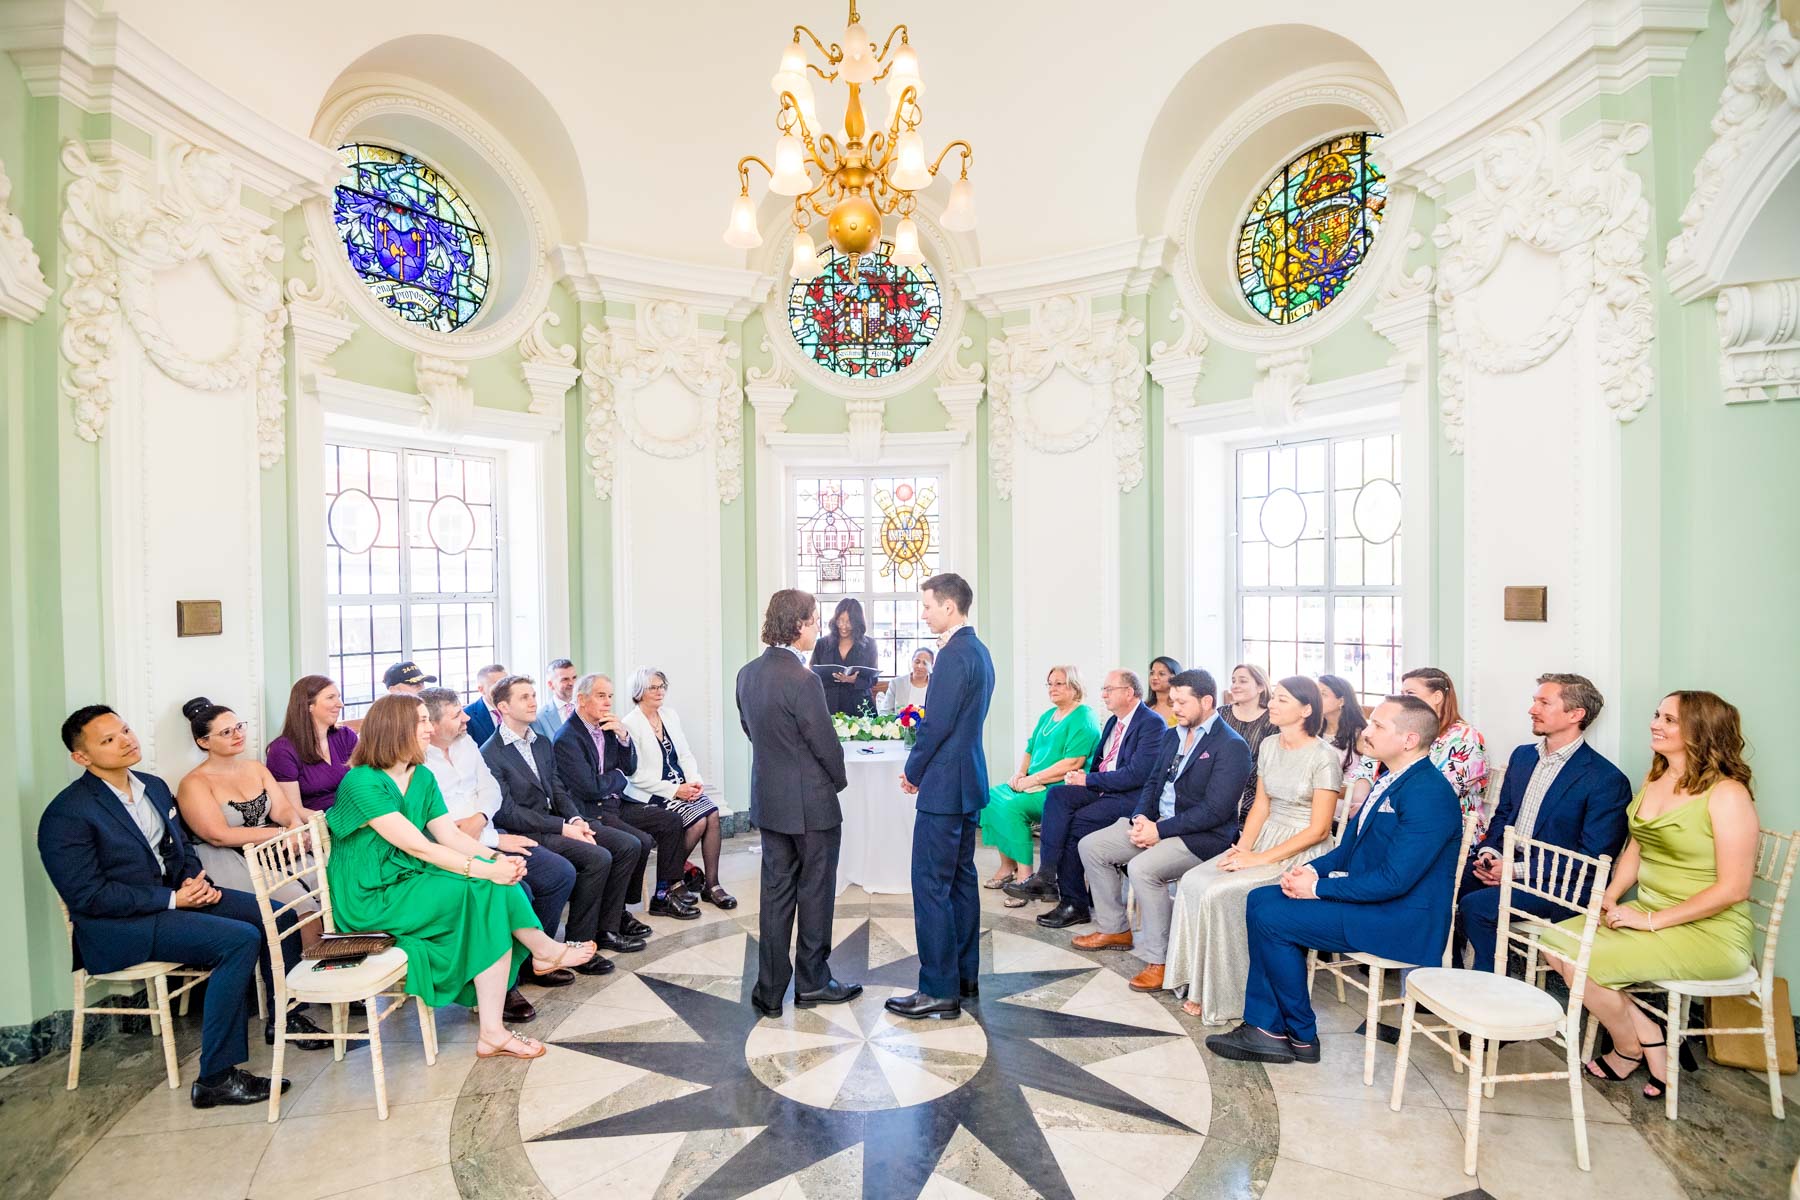 Grooms standing with each other in front of their guests in the Circular Hall at Lambeth